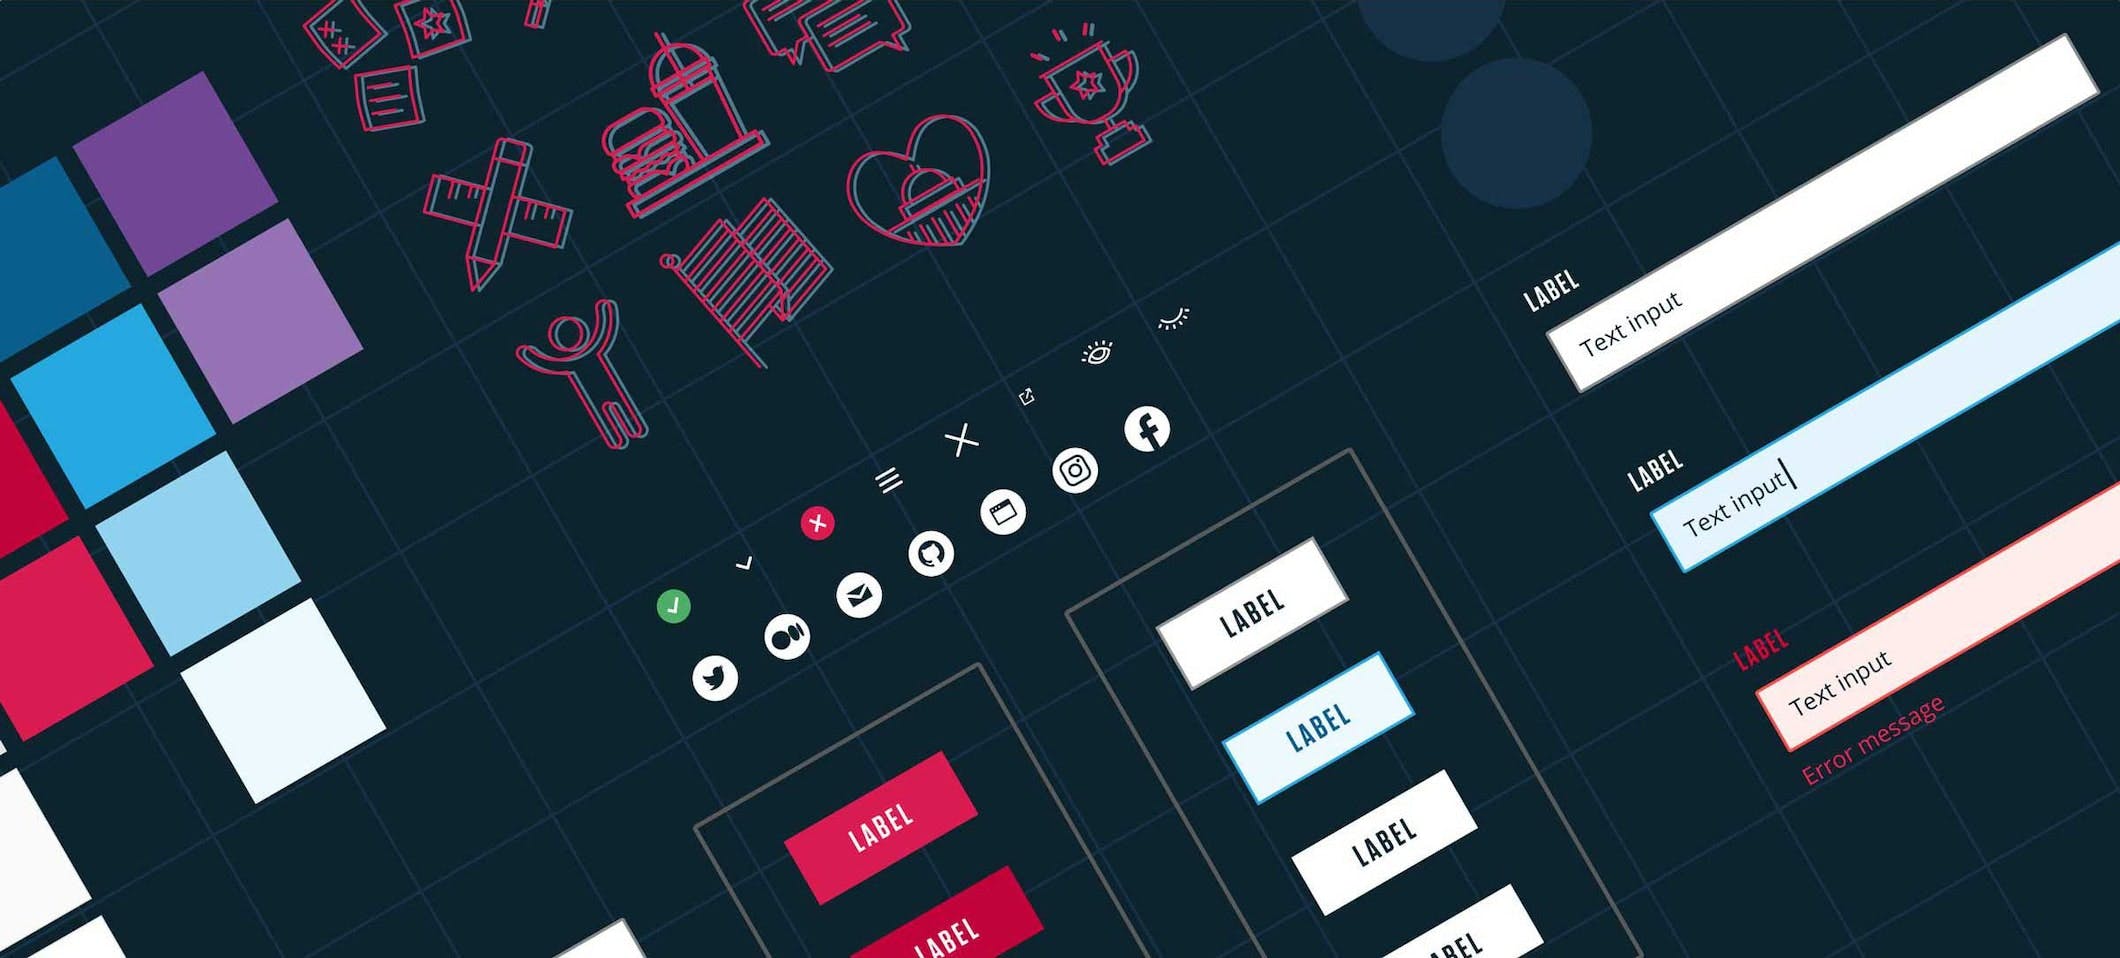 DotGov's digital design system including buttons, form fields, icons, layouts, and more